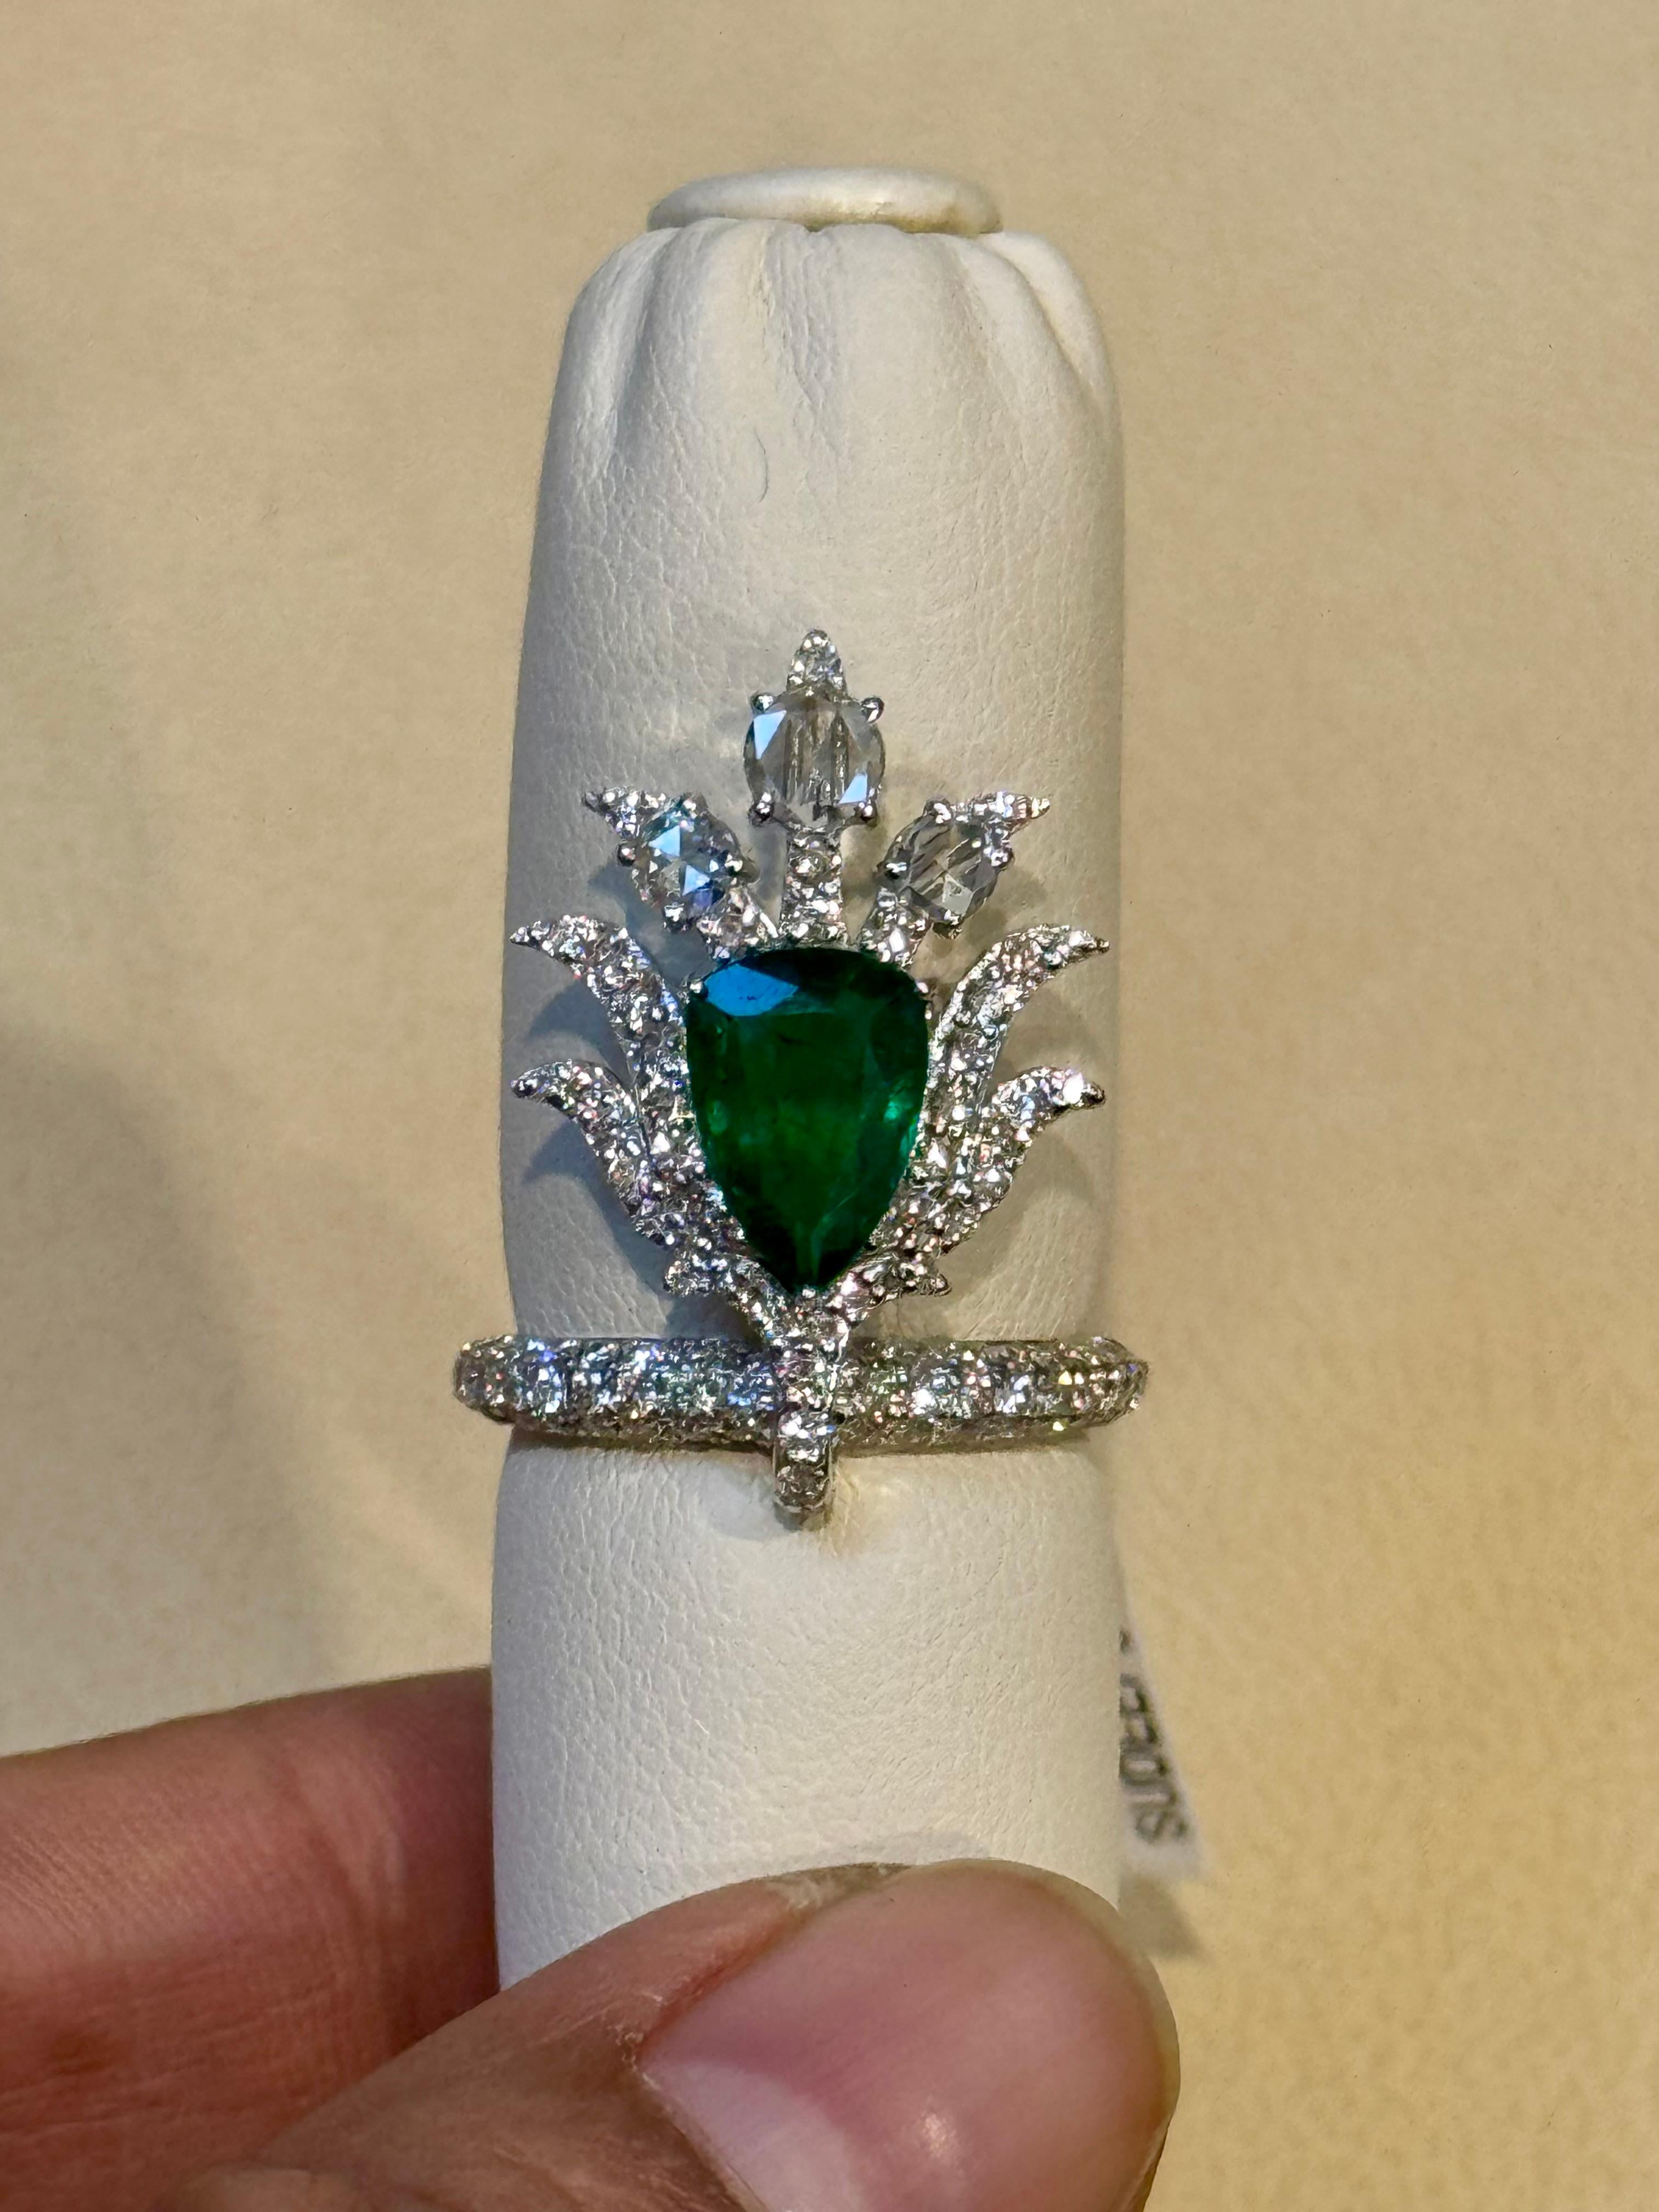 2 Ct Finest Zambian Pear Emerald & 2 Ct Diamond Ring in 18 Kt Gold Size 7 For Sale 3